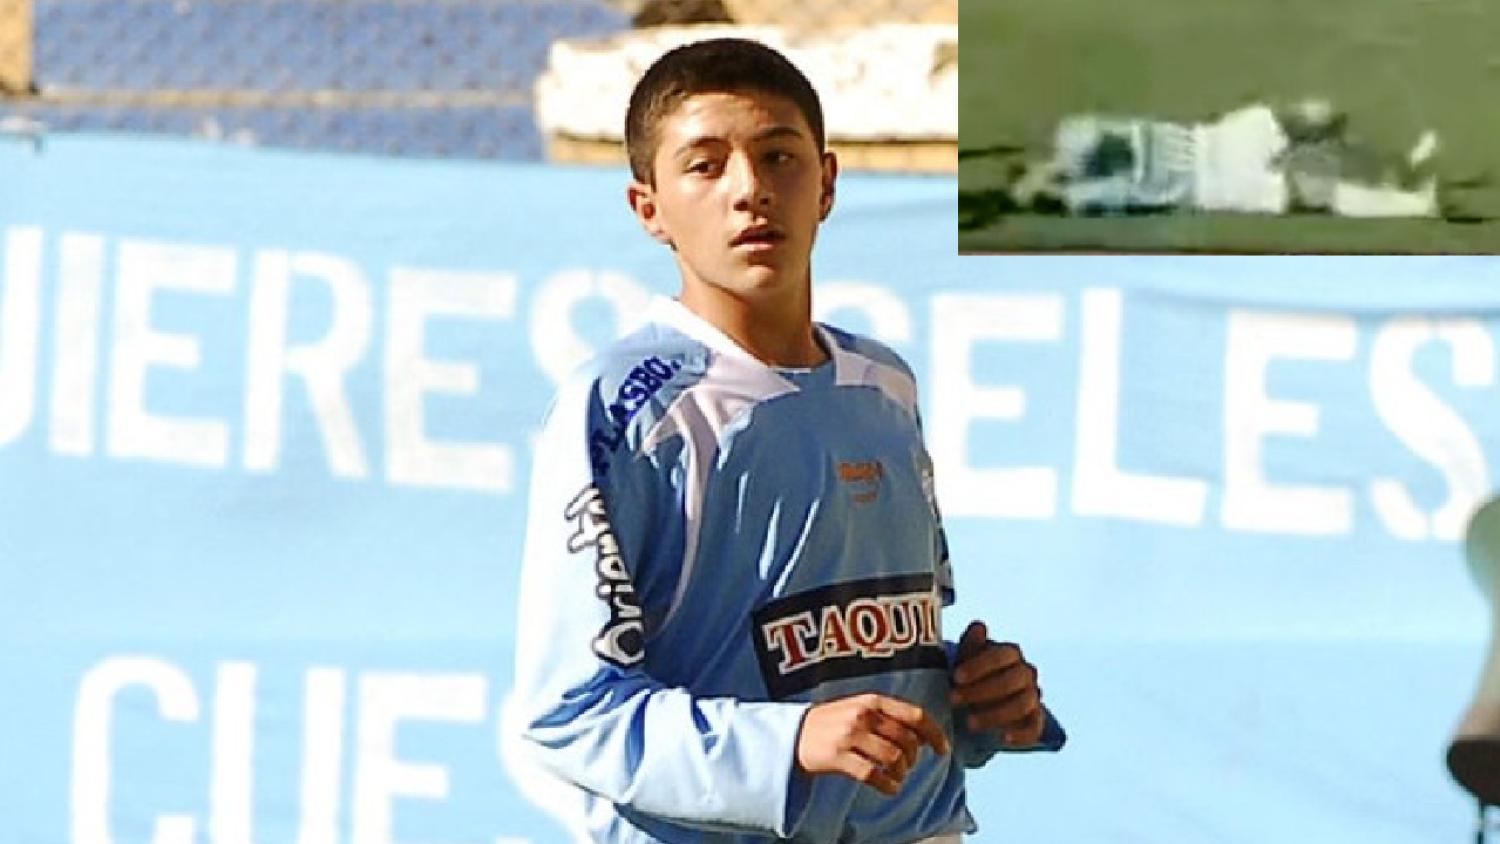 Youngest Pro Soccer Player Ever Was 12. He Almost Died Out There